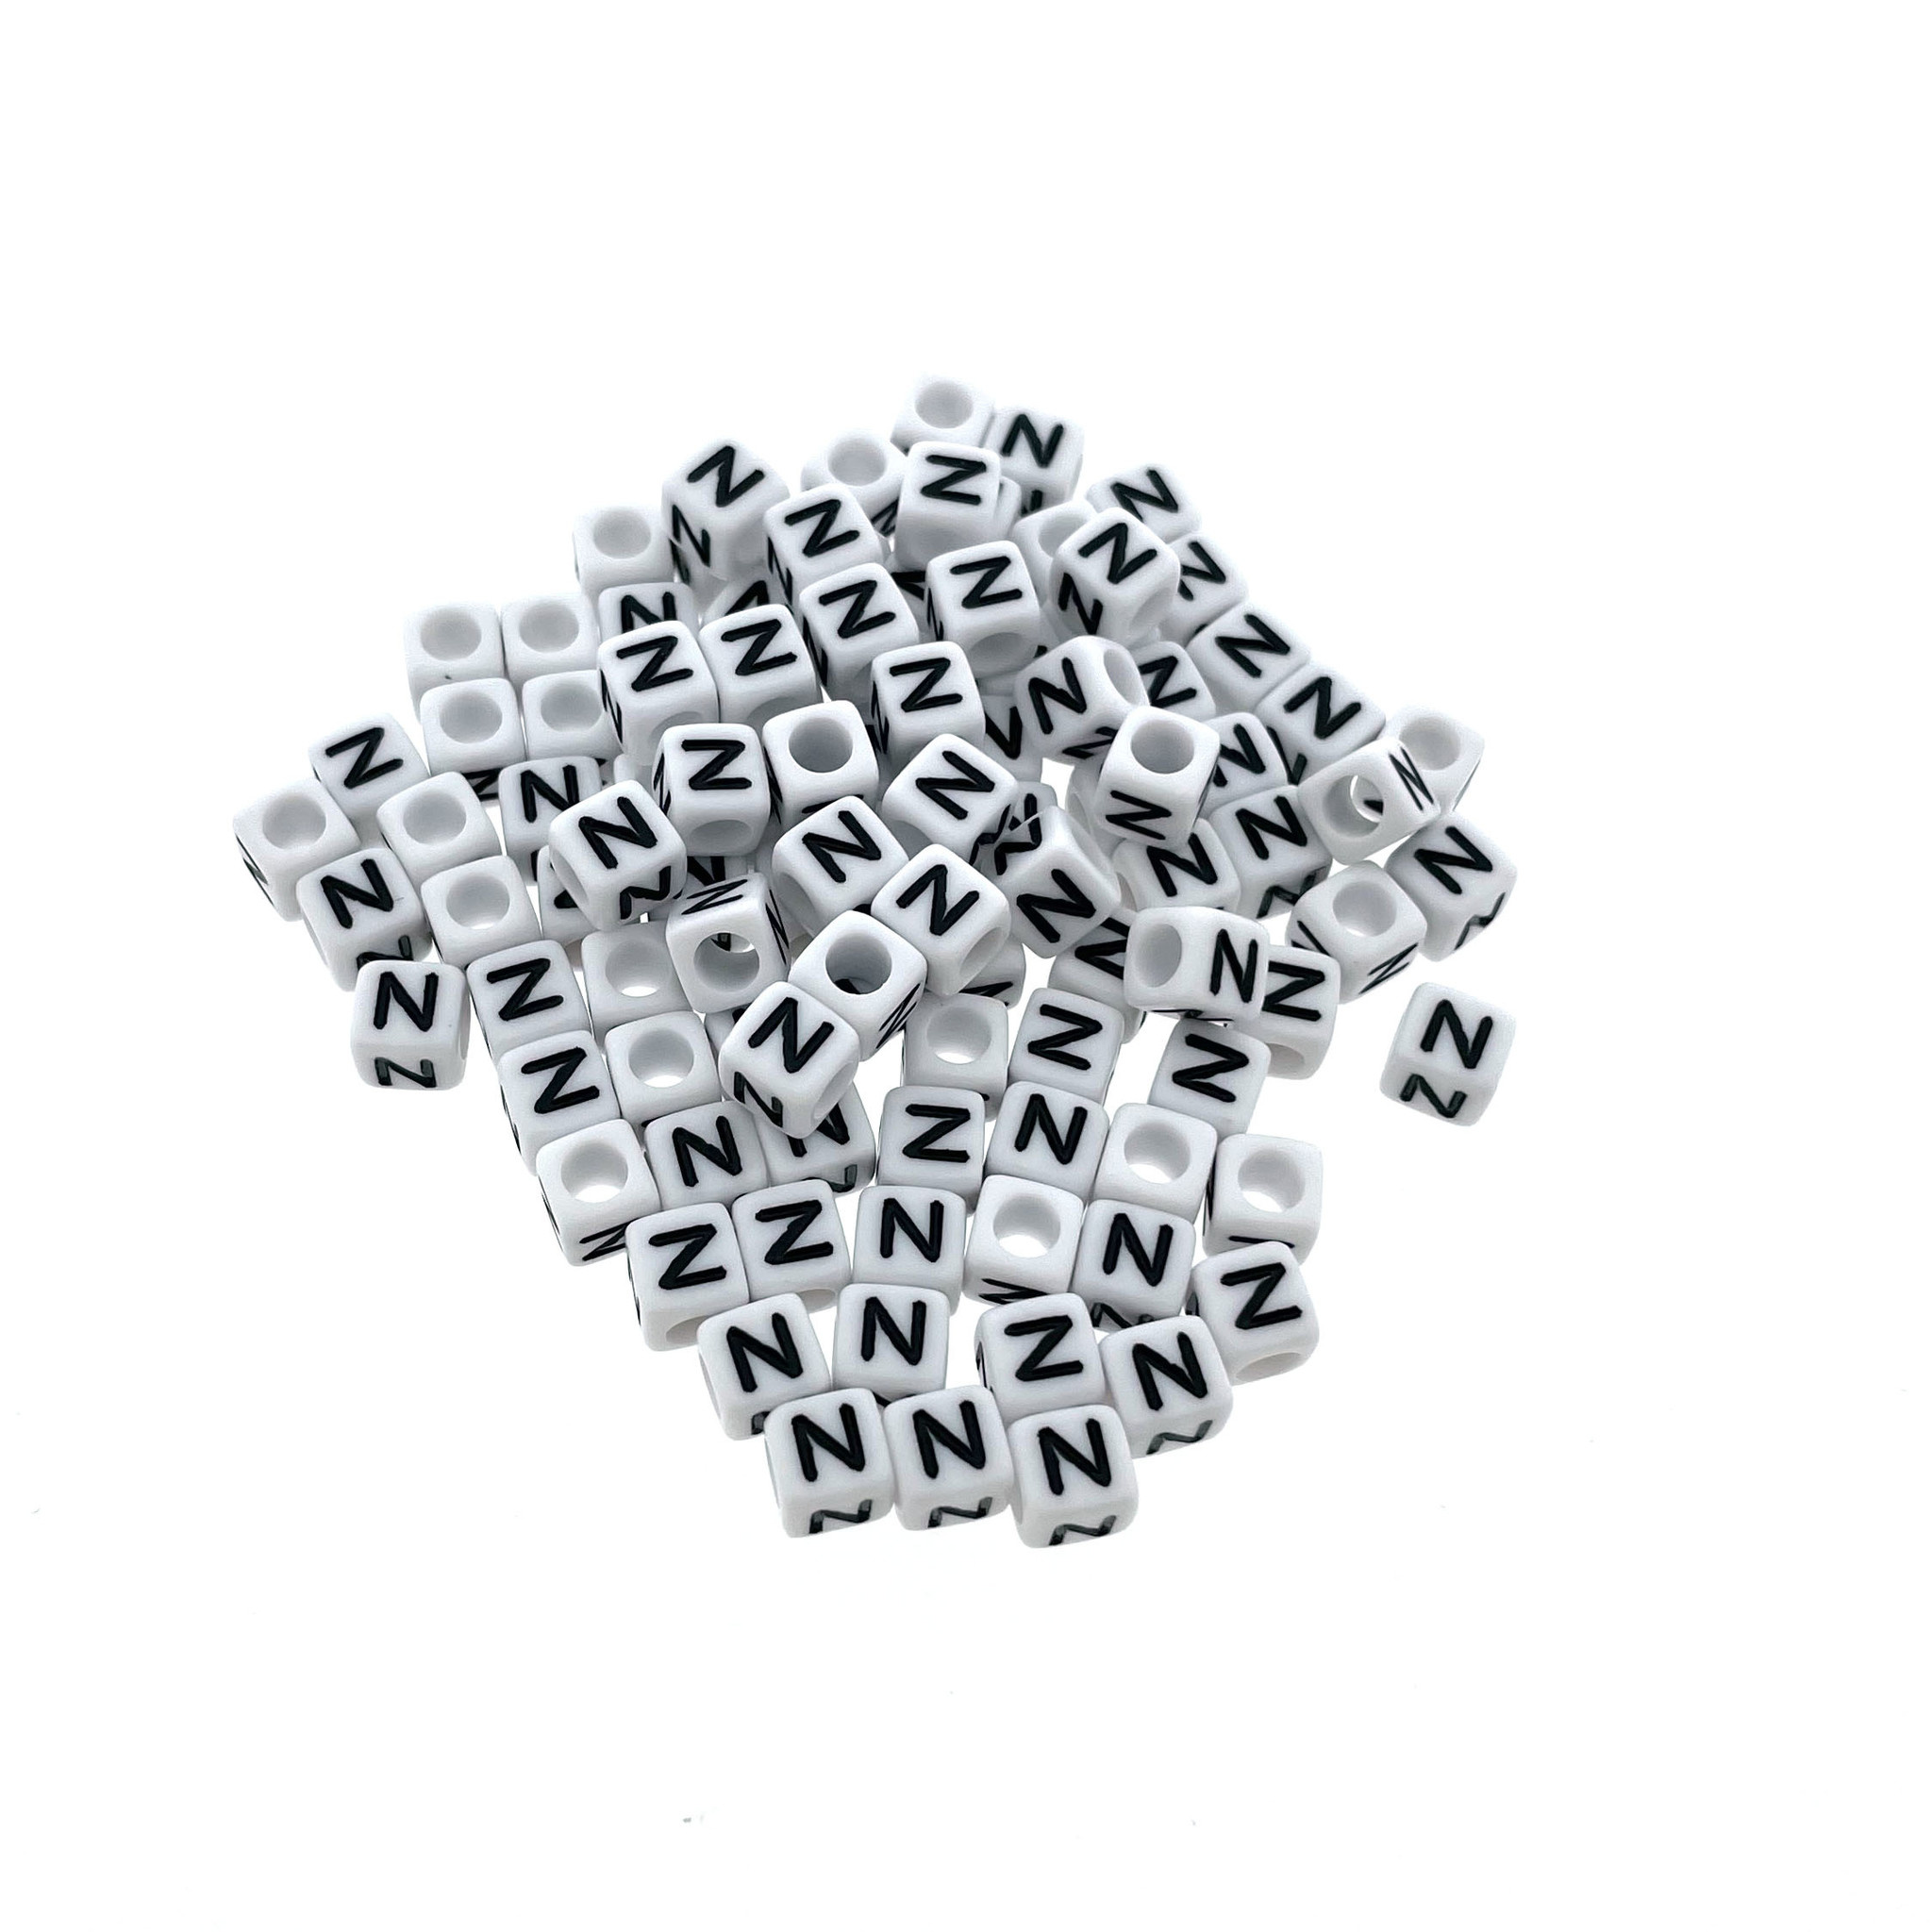 Buy Paracord alphabet letter beads White P at 123Paracord - 123Paracord